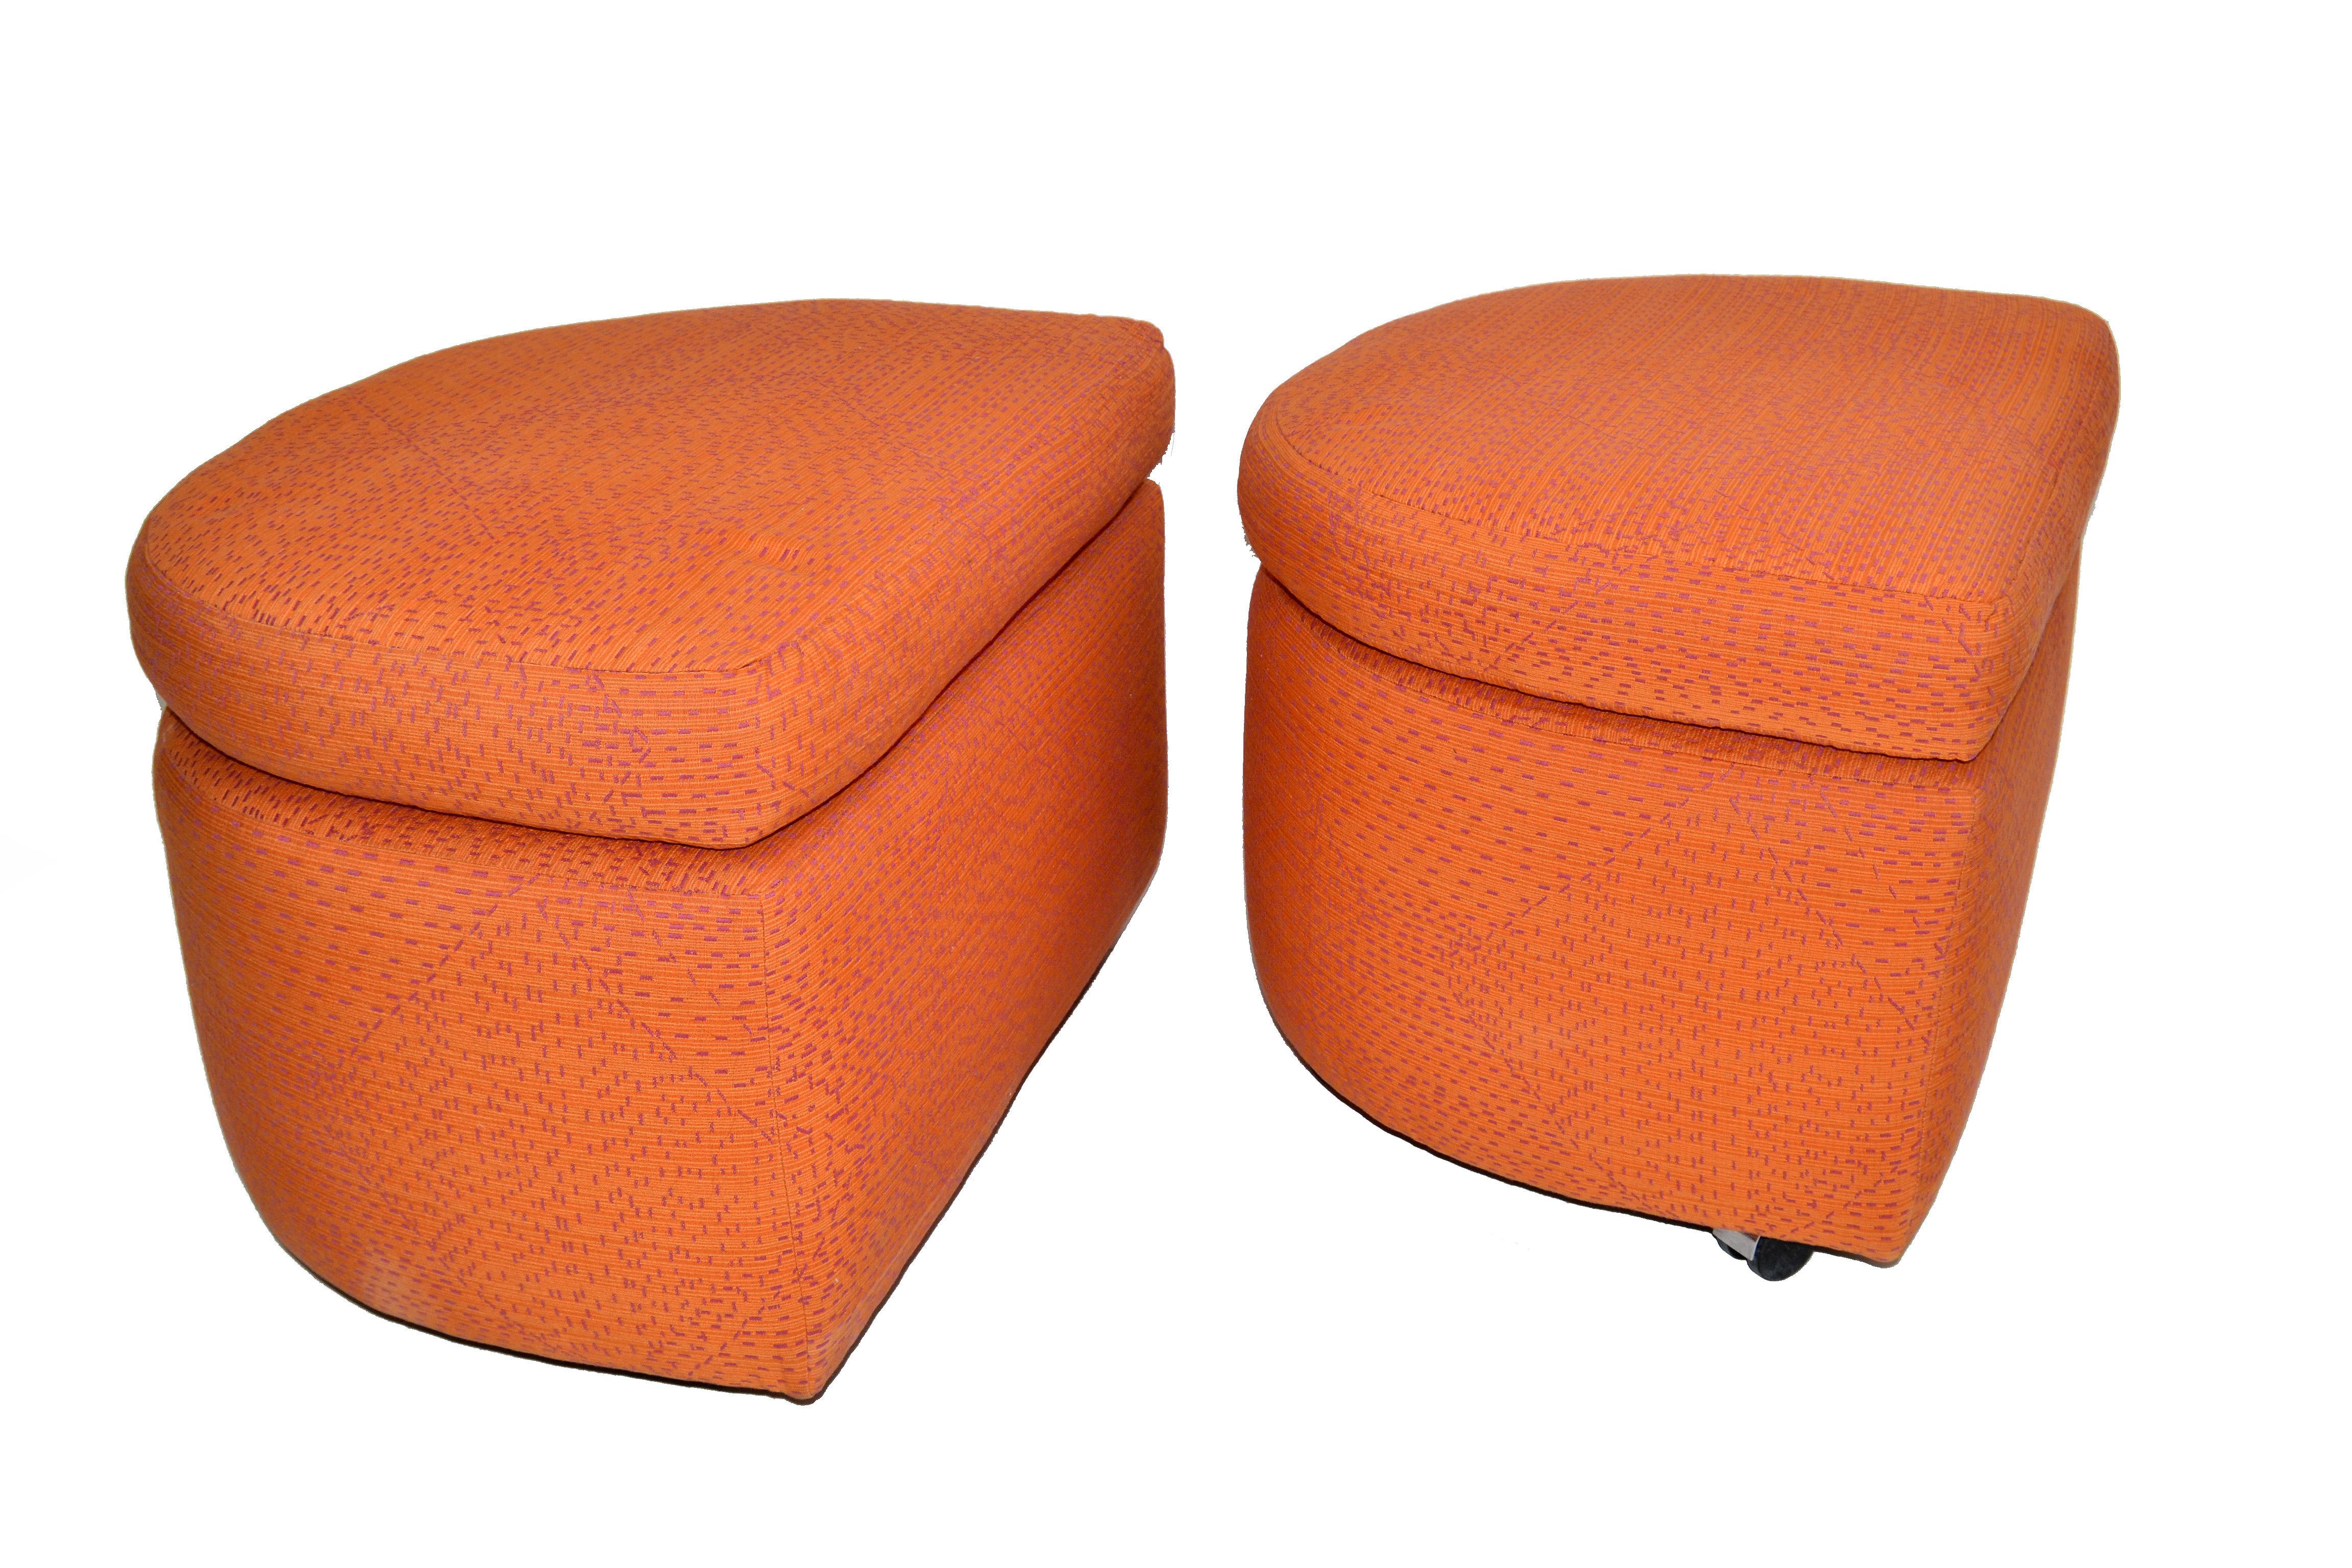 American Mid-Century Modern Orange Cotton Upholstery Ottoman on Casters & Cushions - Pair For Sale